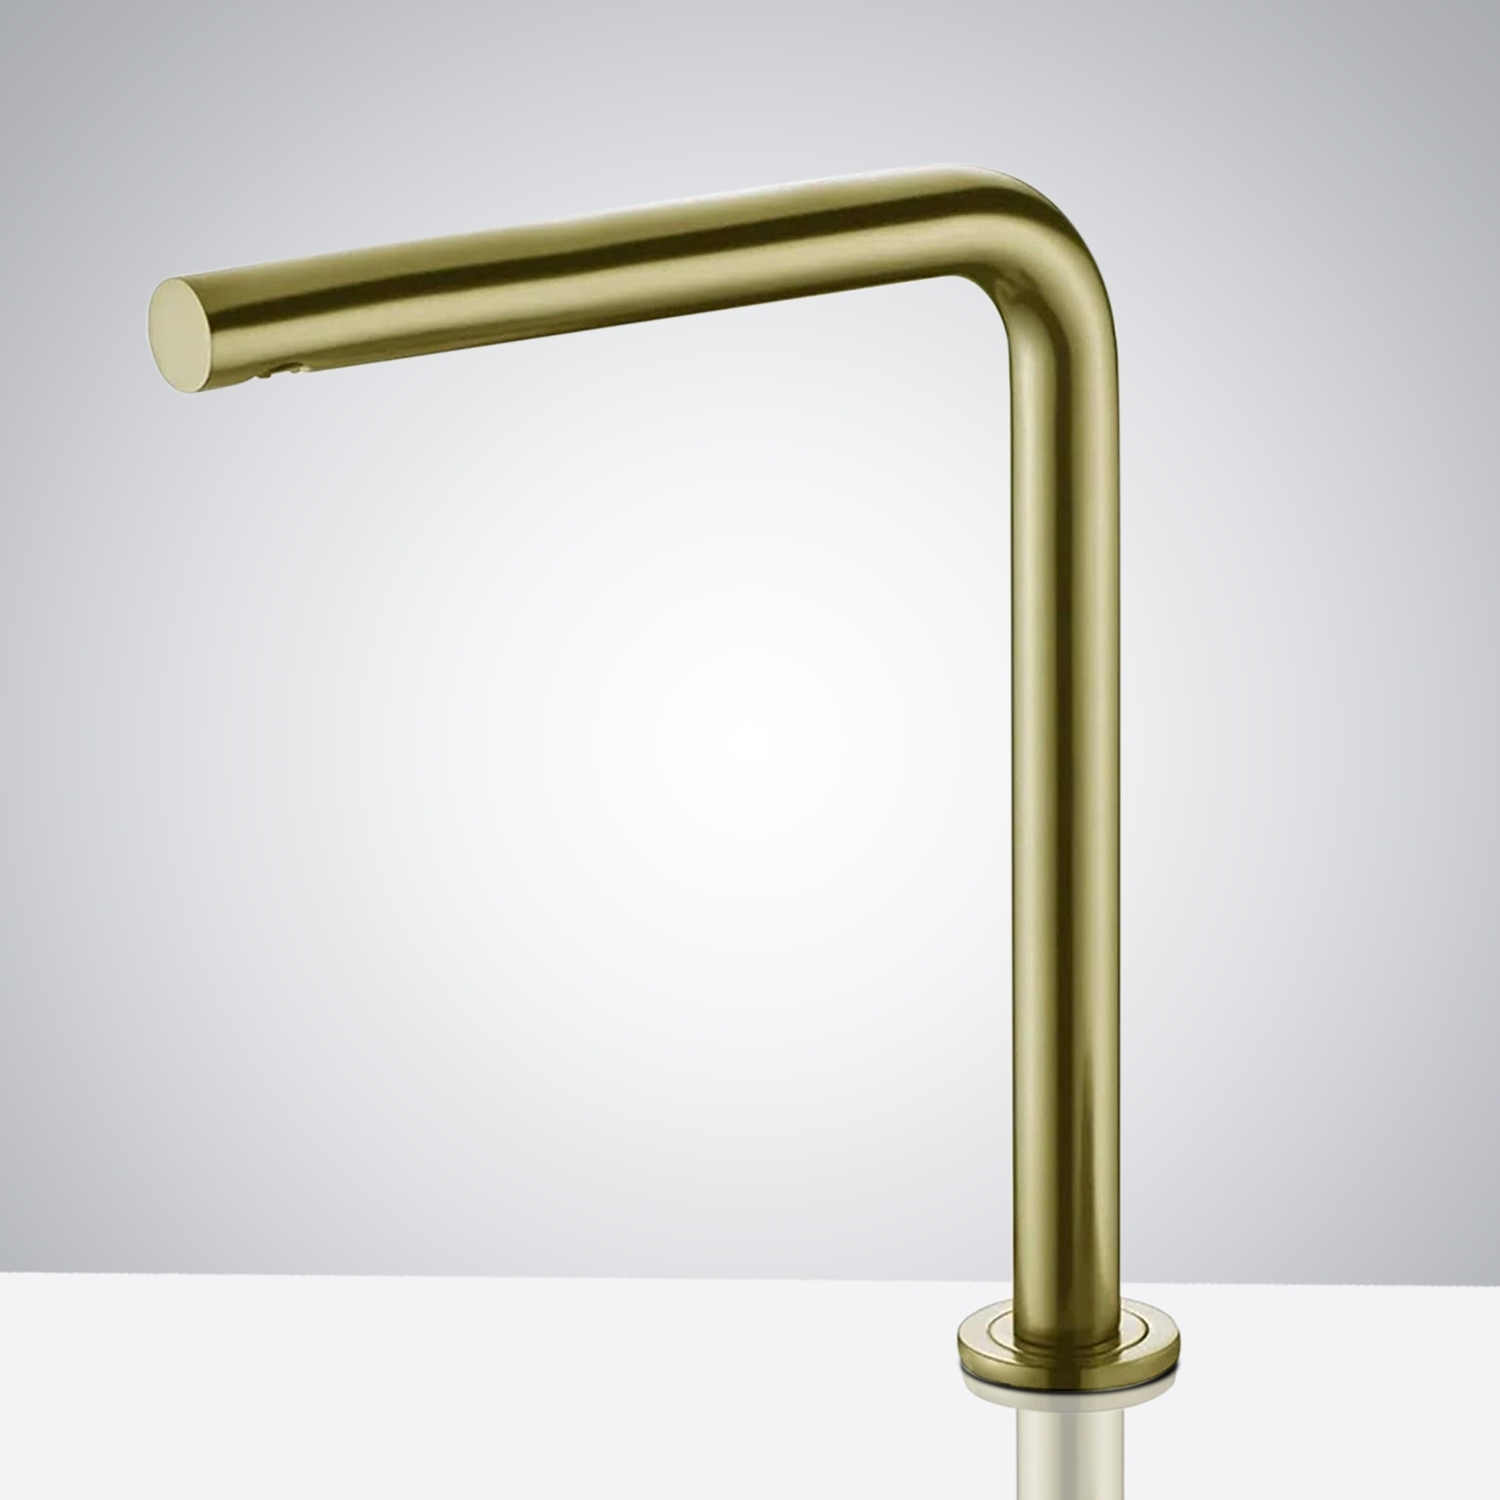 Fontana Commercial Deck Mounted Gold Automatic Touchless Infrared Hot and Cold Sensor Faucet